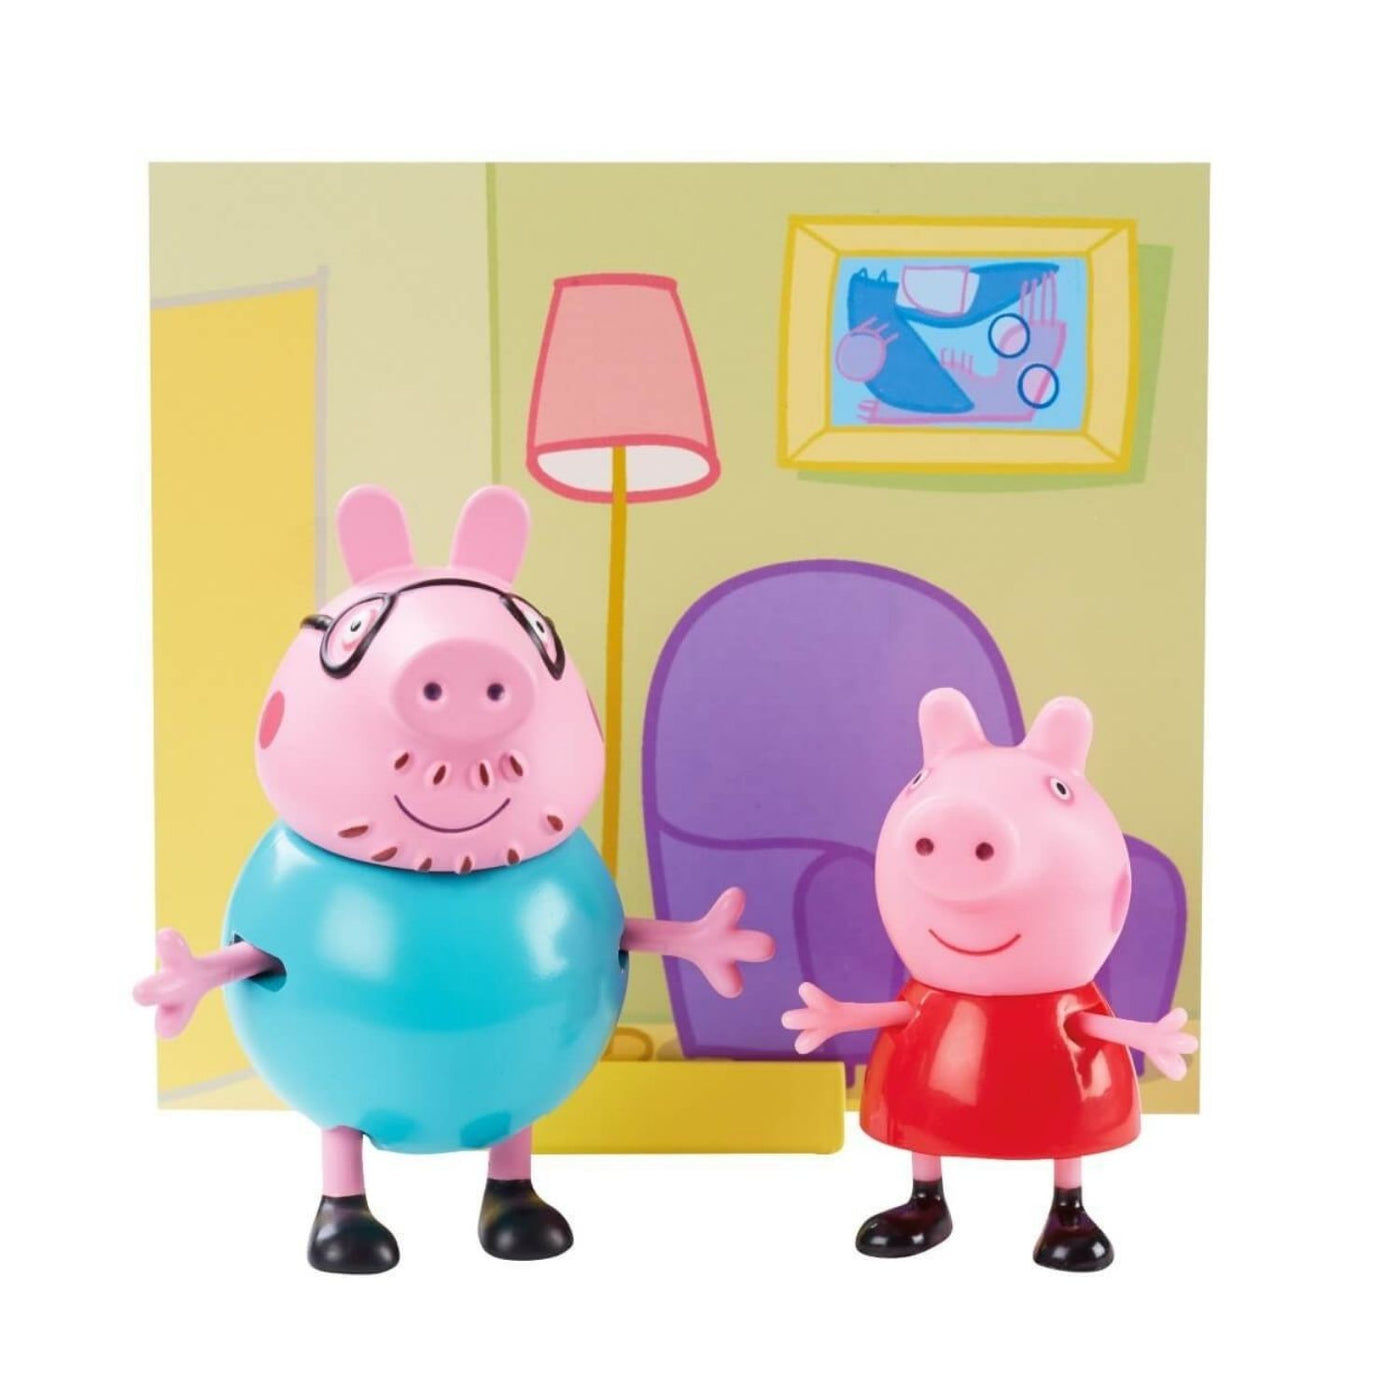 Peppa Pig family and friends from felt - Inspire Uplift